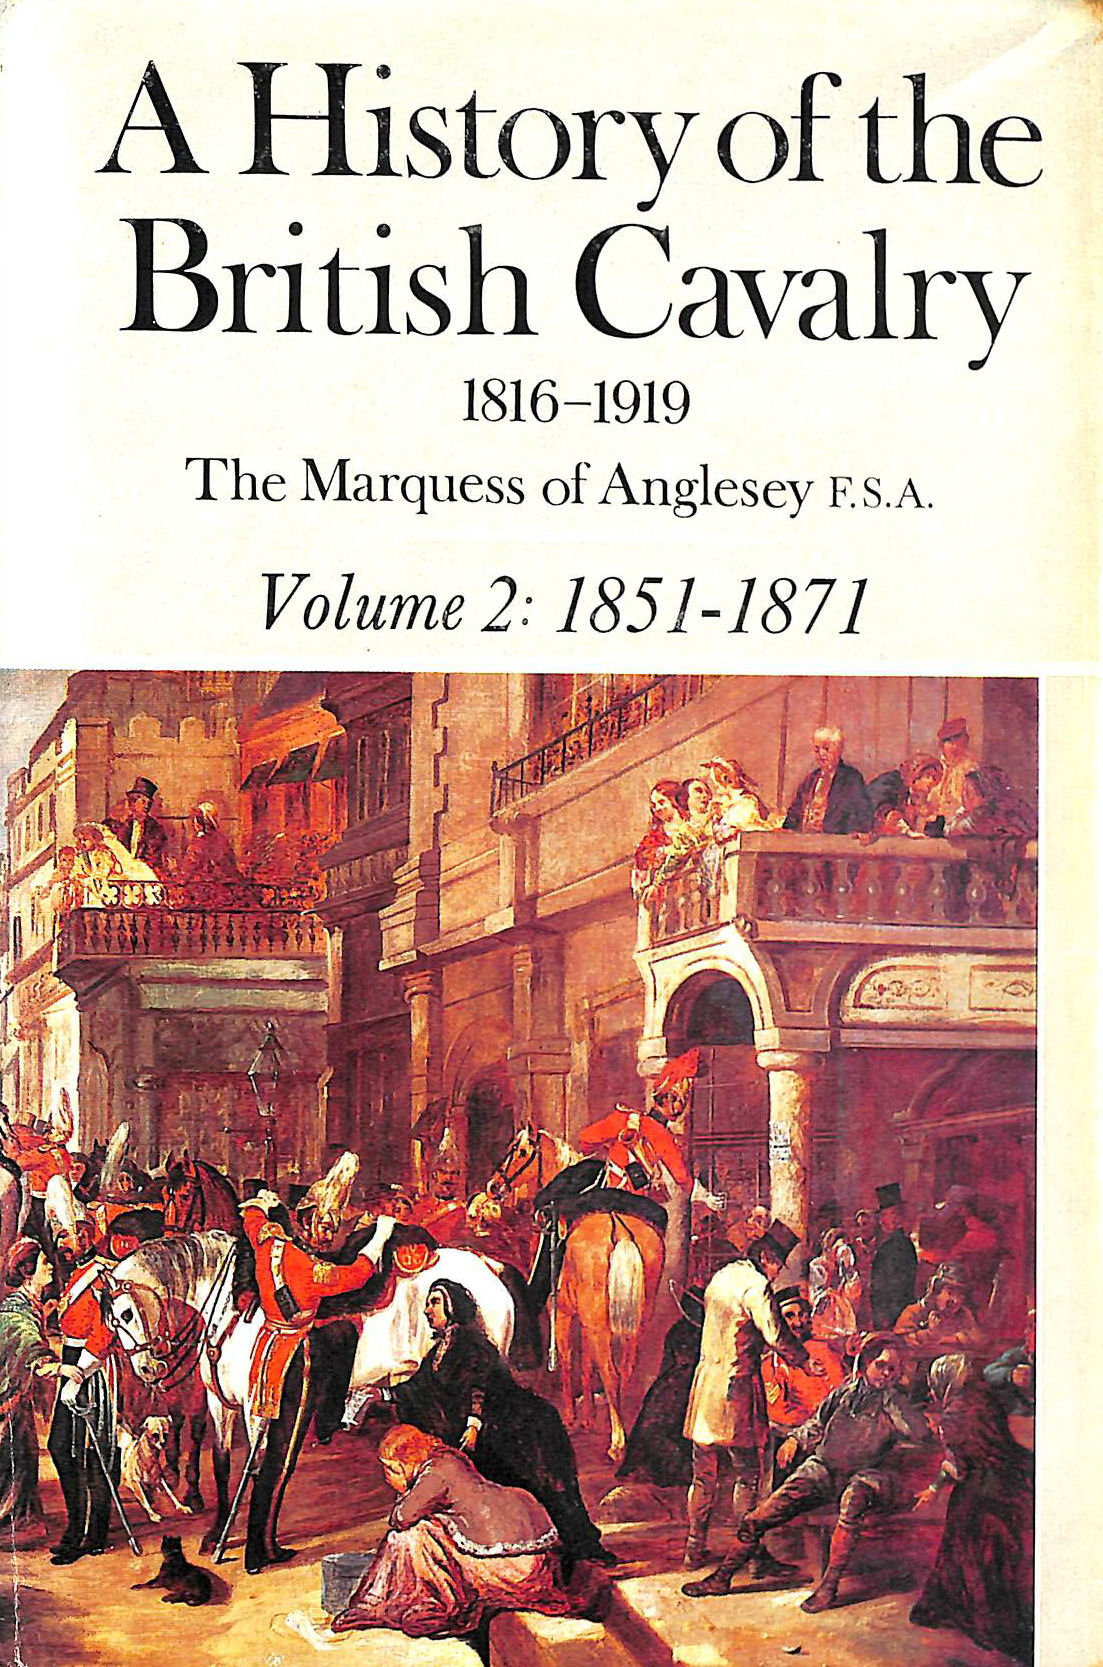 THE MARQUESS OF ANGLESEY - A History of the British Cavalry, 1816-1919: 1851-71 v.2: 1851-71 Vol 2